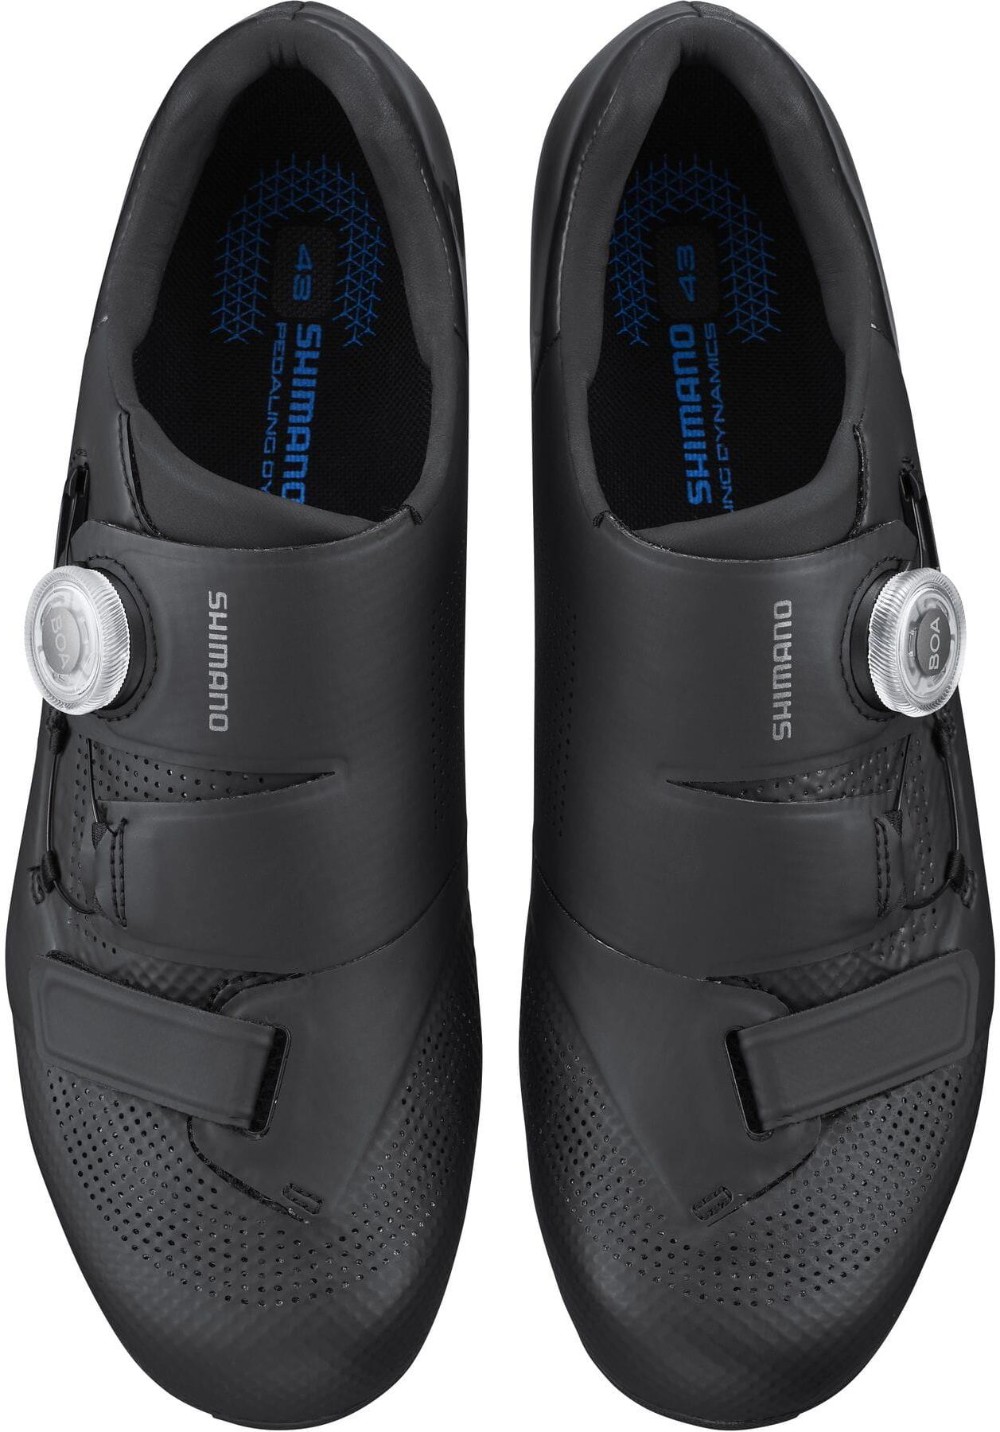 RC5(RC502) SPD-SL Road Cycling Shoes image 1